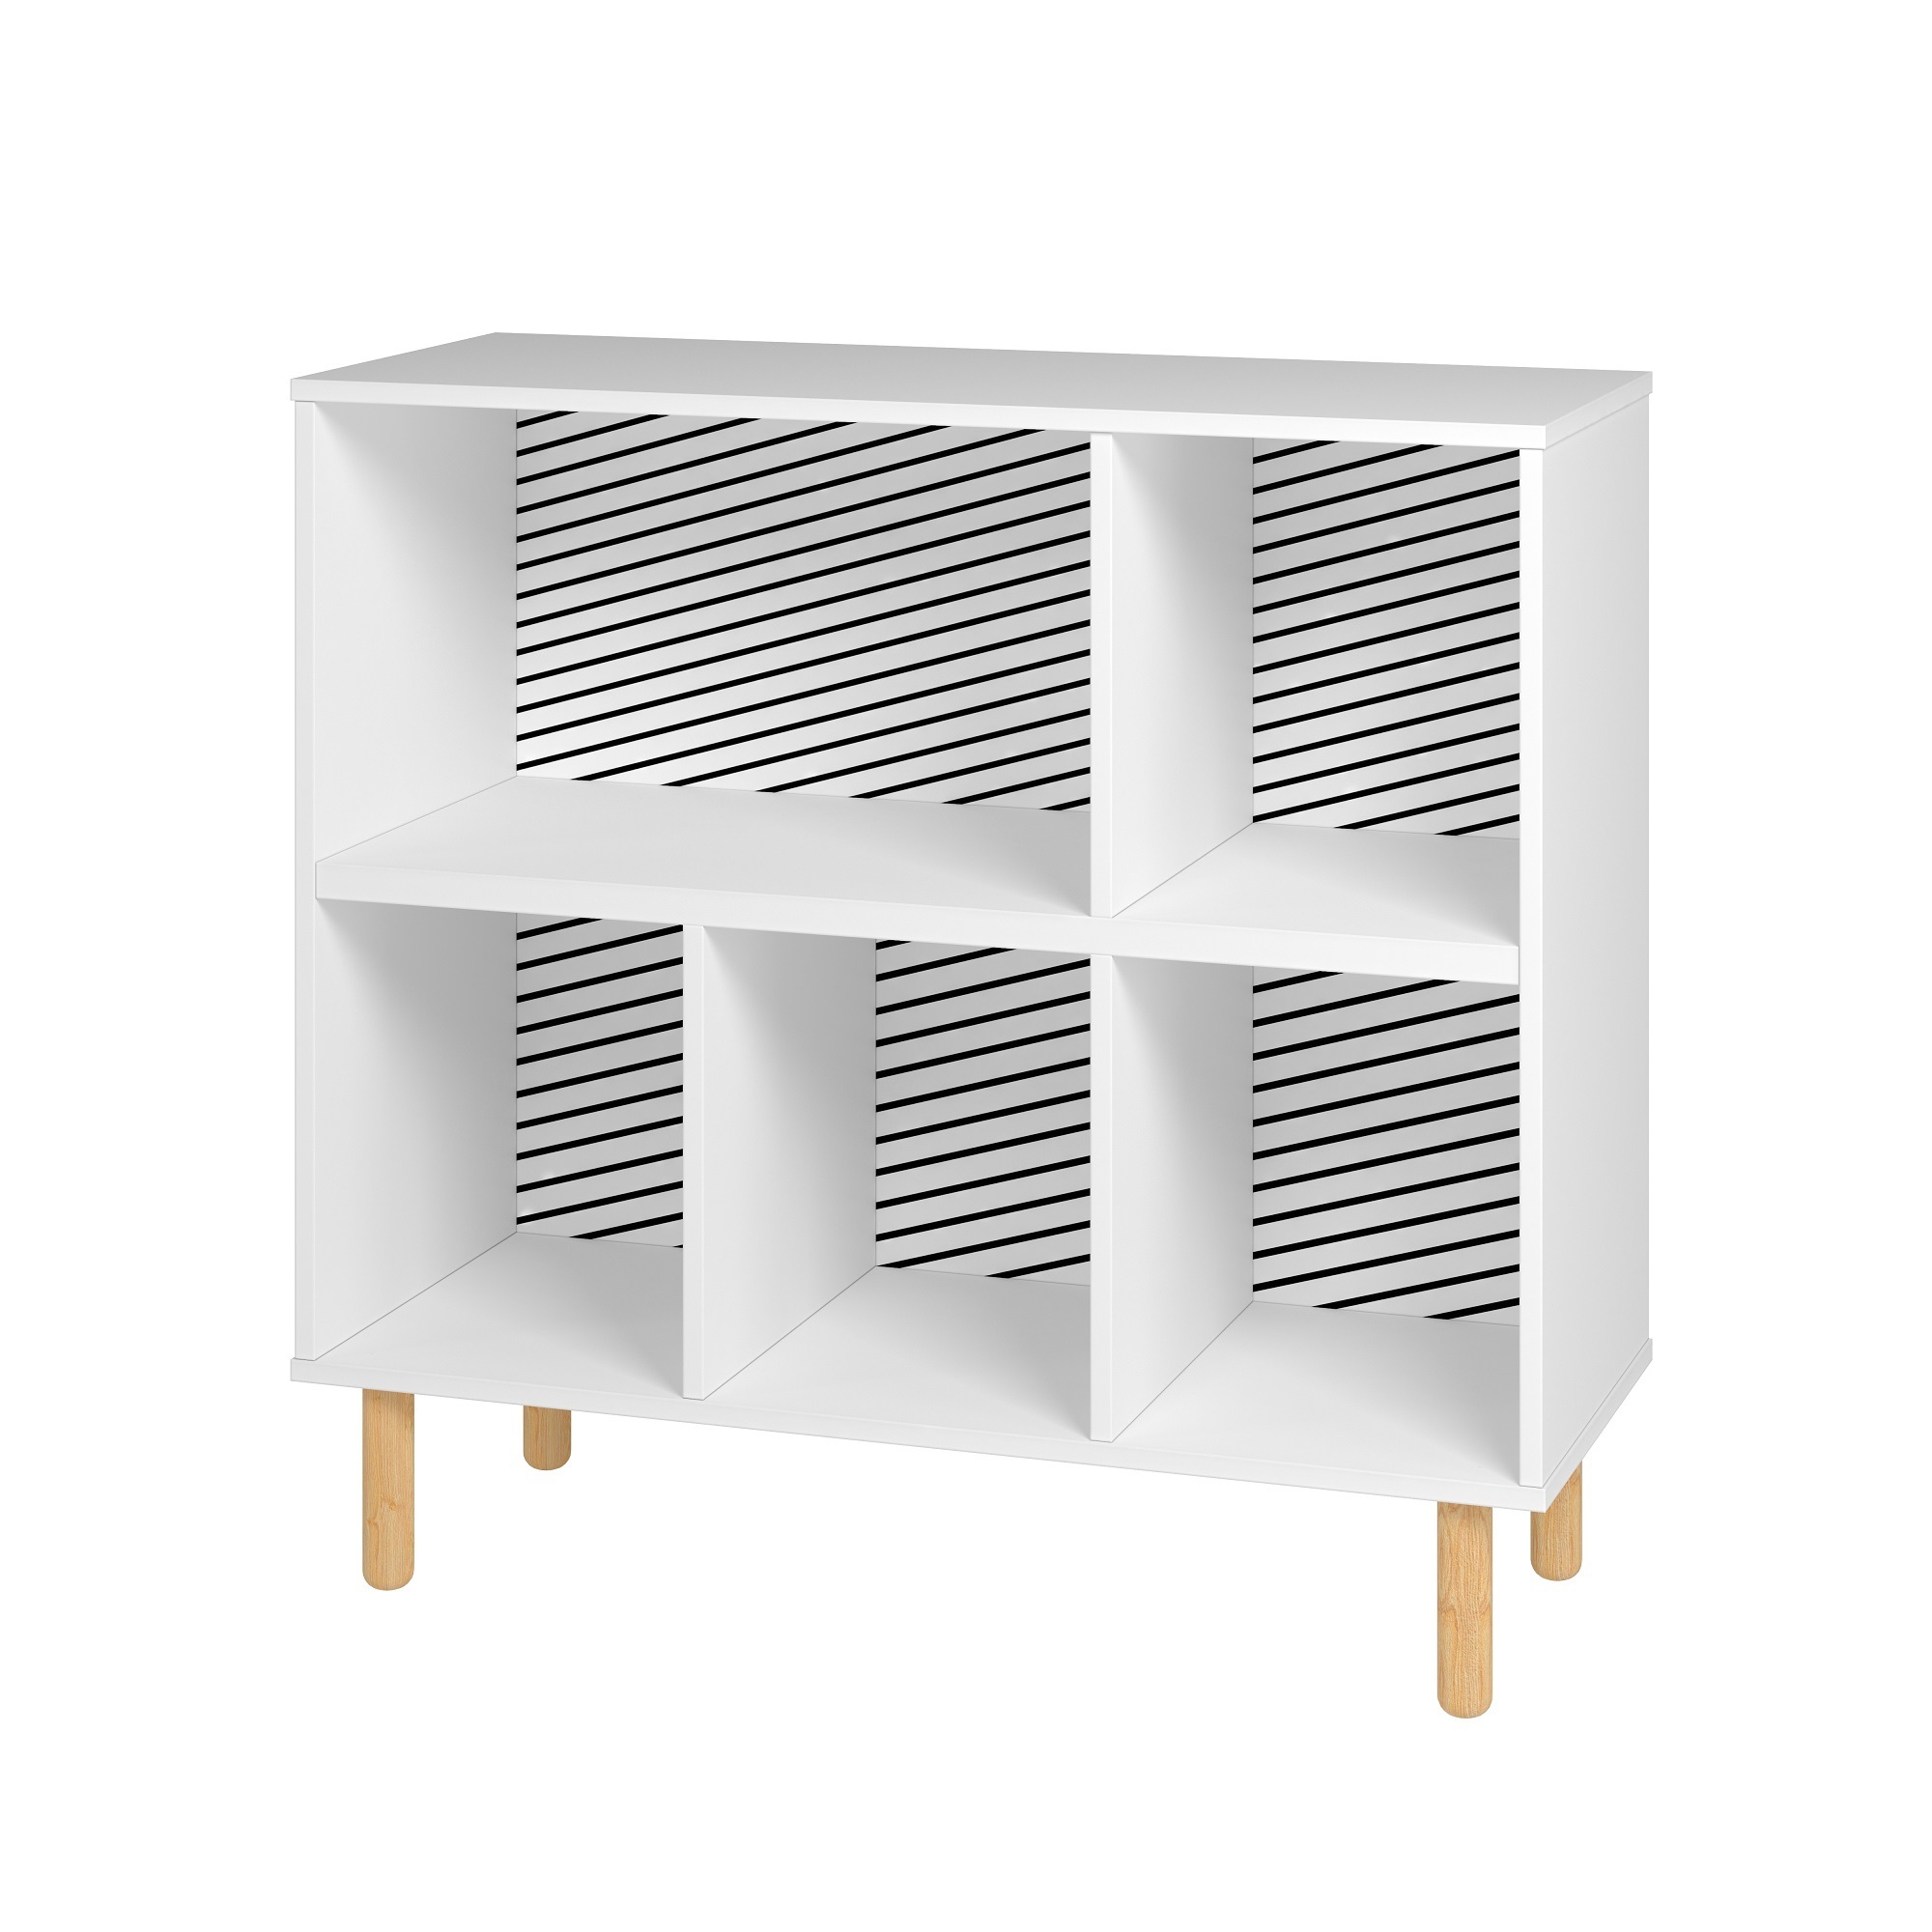 Manhattan Comfort, Essex 33.66 Low Bookcase in White and Zebra, Height 33.66 in, Shelves (qty.) 5 Material MDPE, Model 406AMC